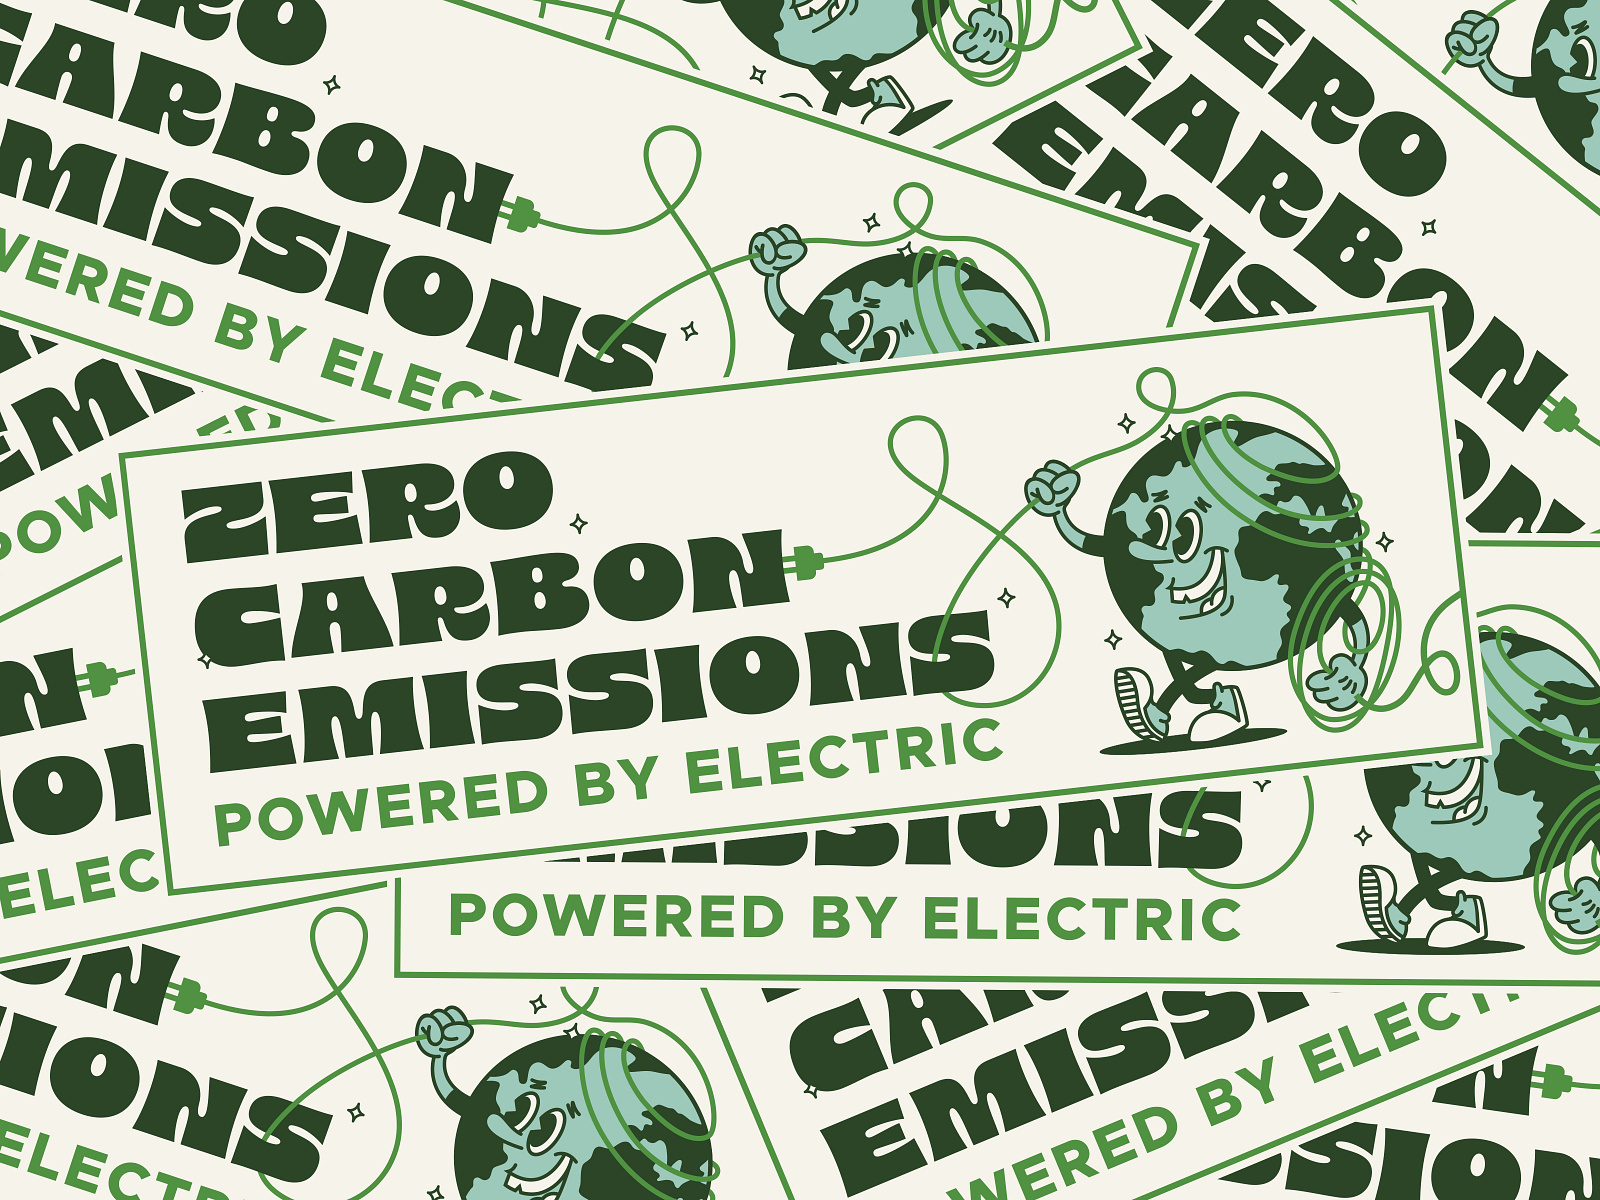 Electric Vehicle Bumper Sticker by Abby Richey on Dribbble